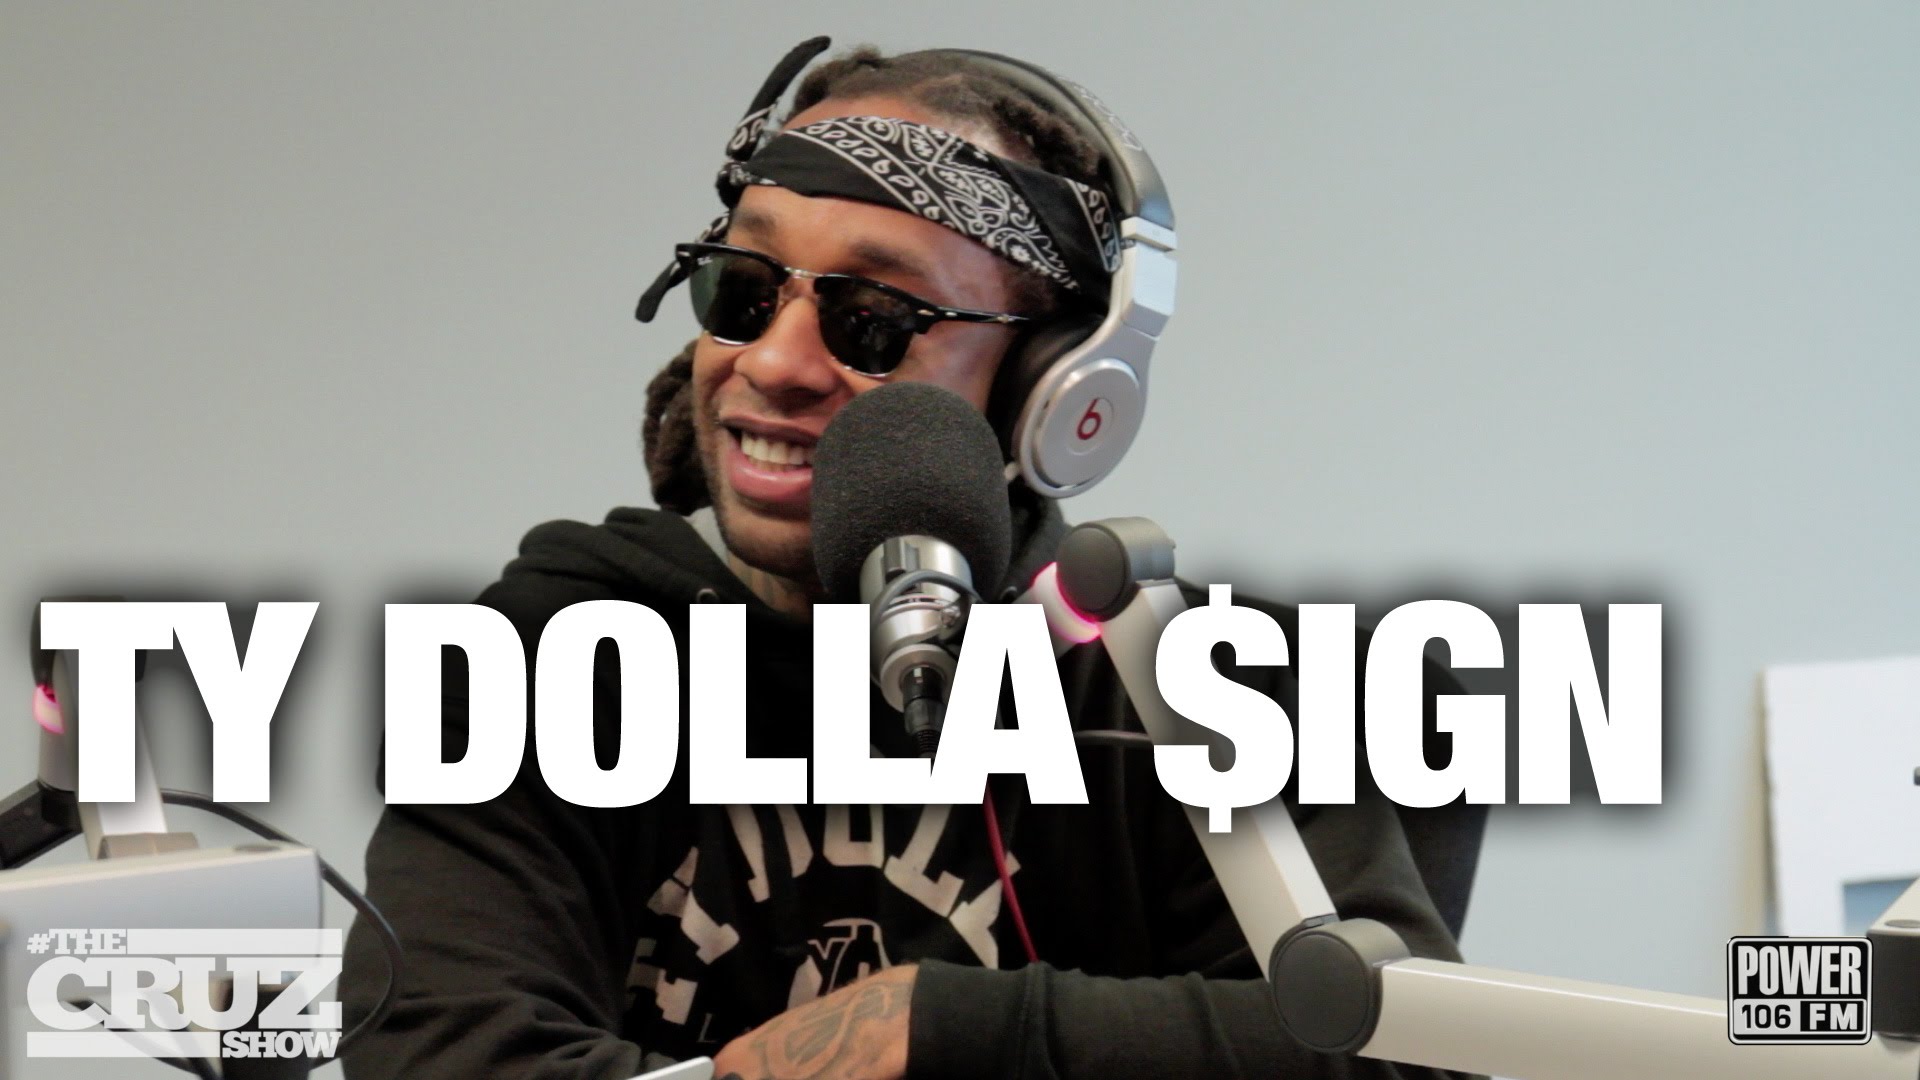 TY Dolla $ign Talks One Night Stands On #TheCruzShow (Video)